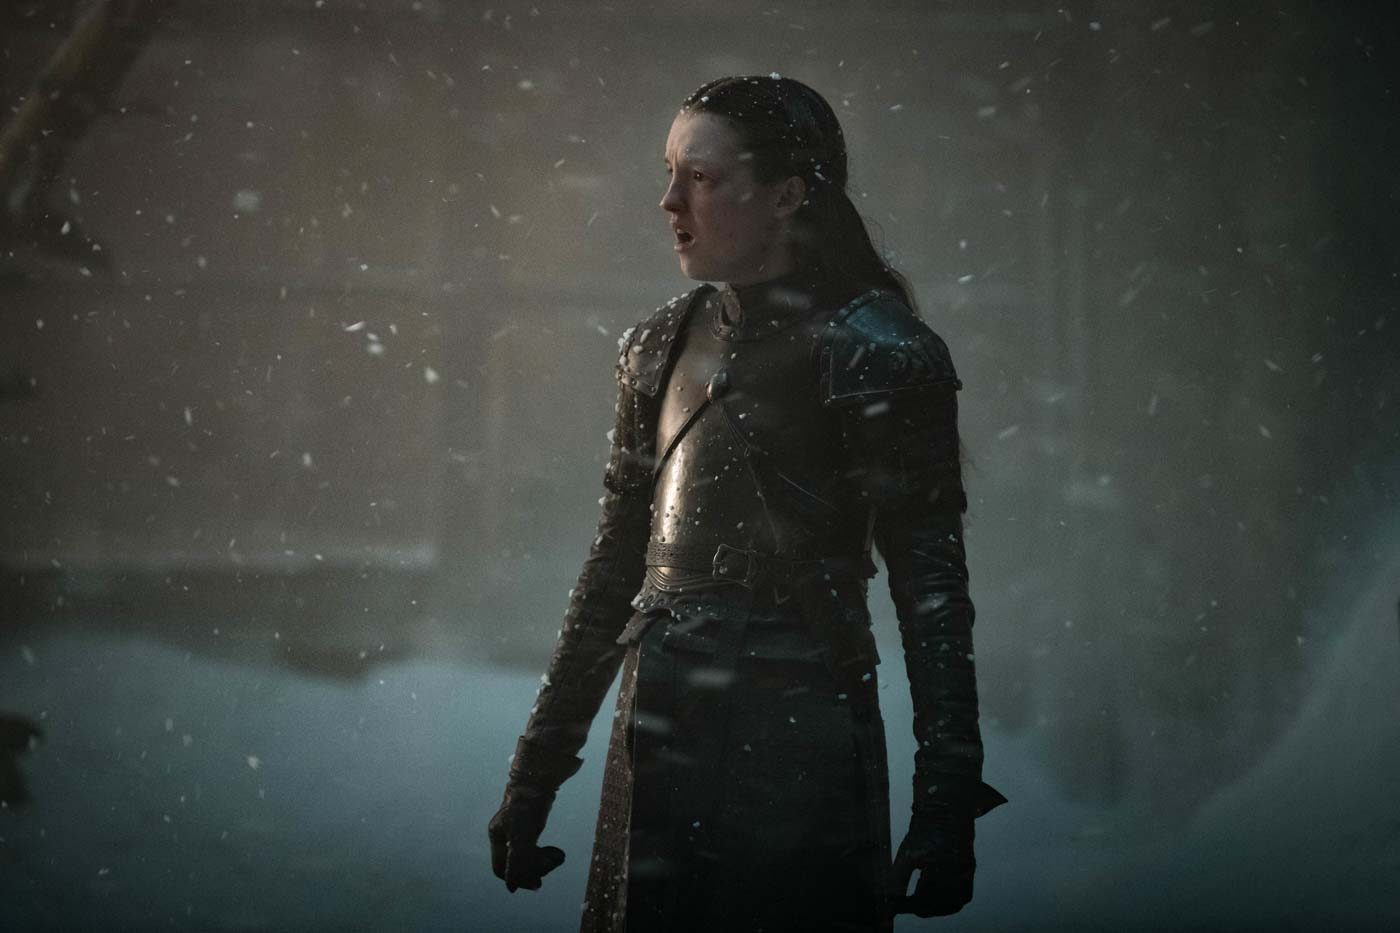 Battle of Winterfell: What the actresses who play Arya Stark, Lyanna Mormont have to say